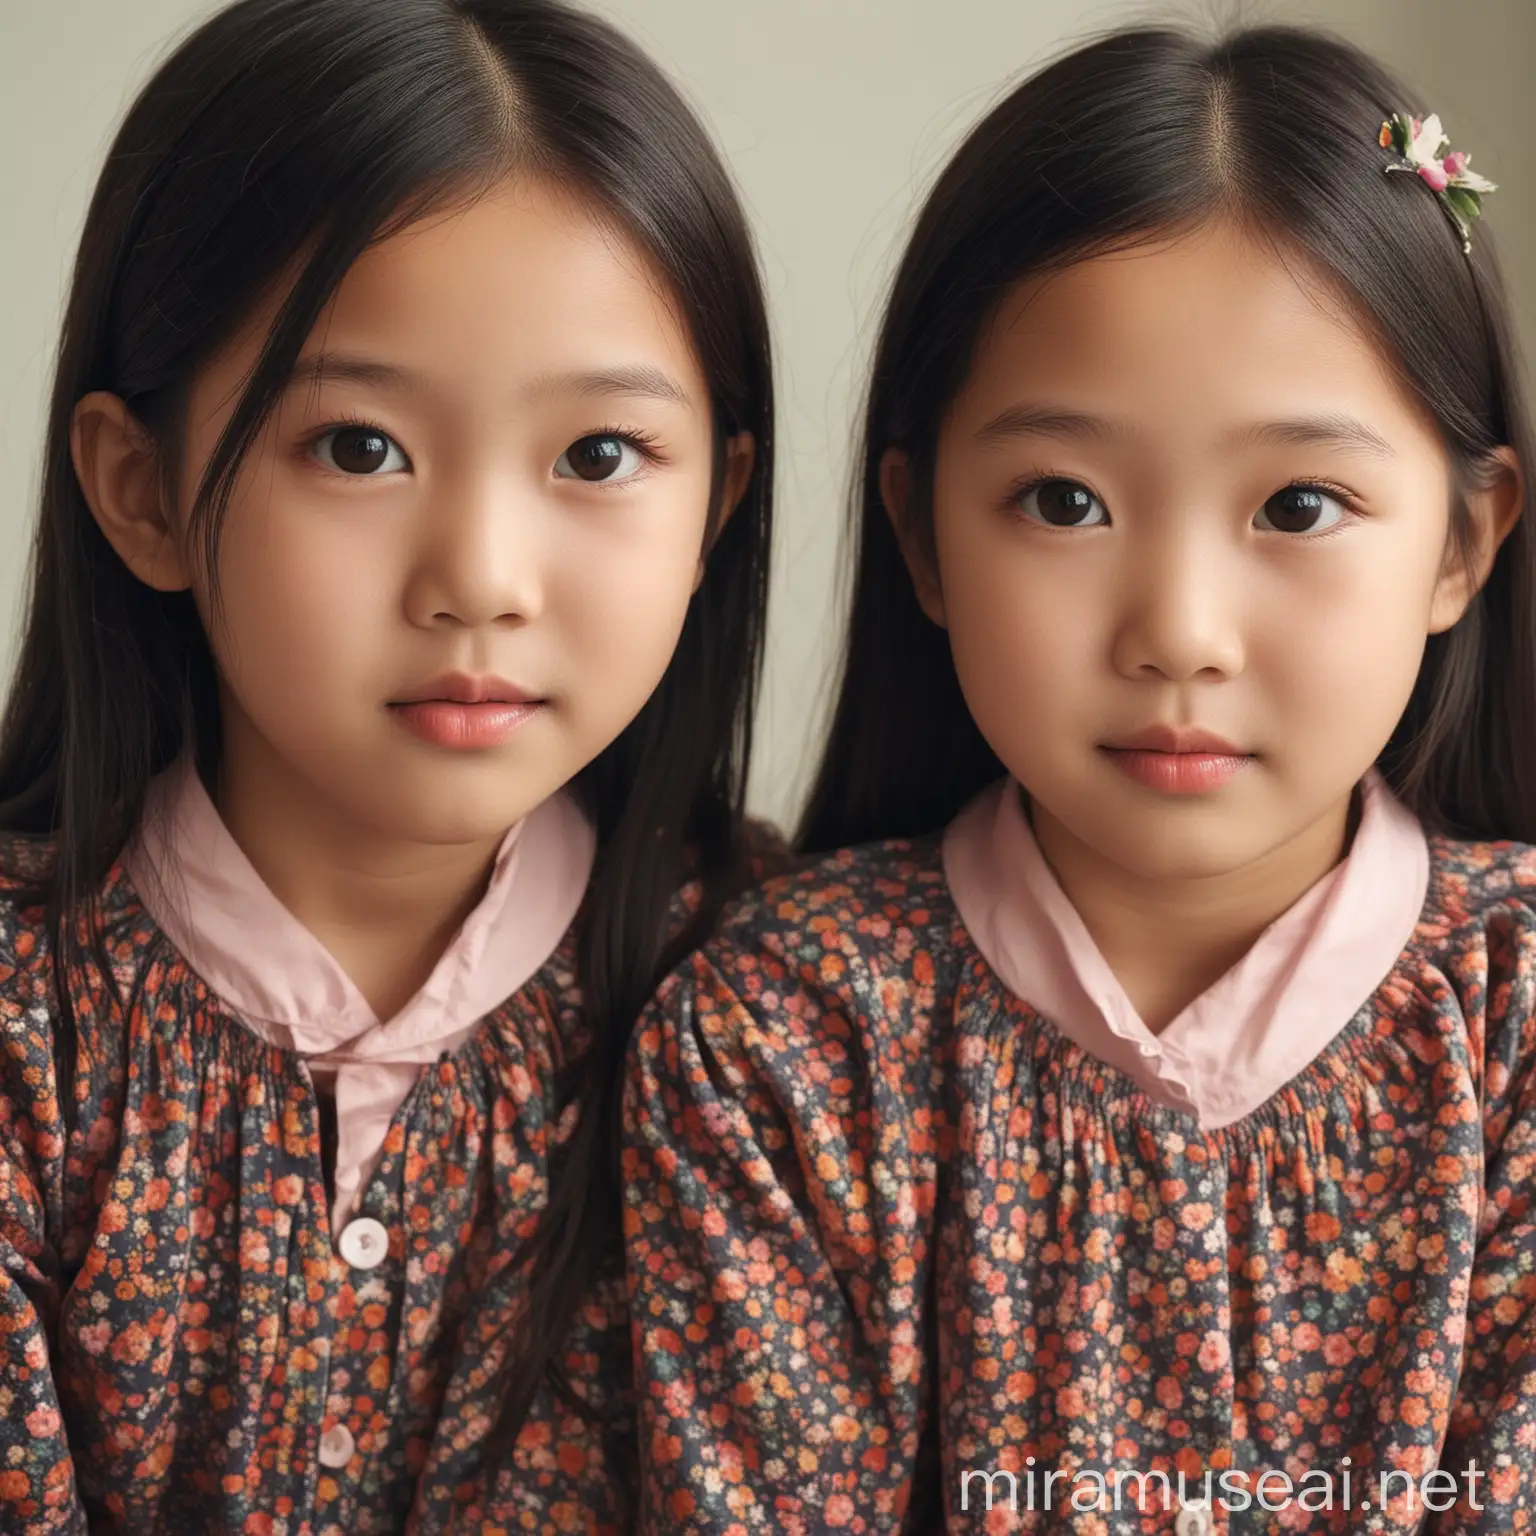 Asian Twin Girls 10YearOlds Smiling Together